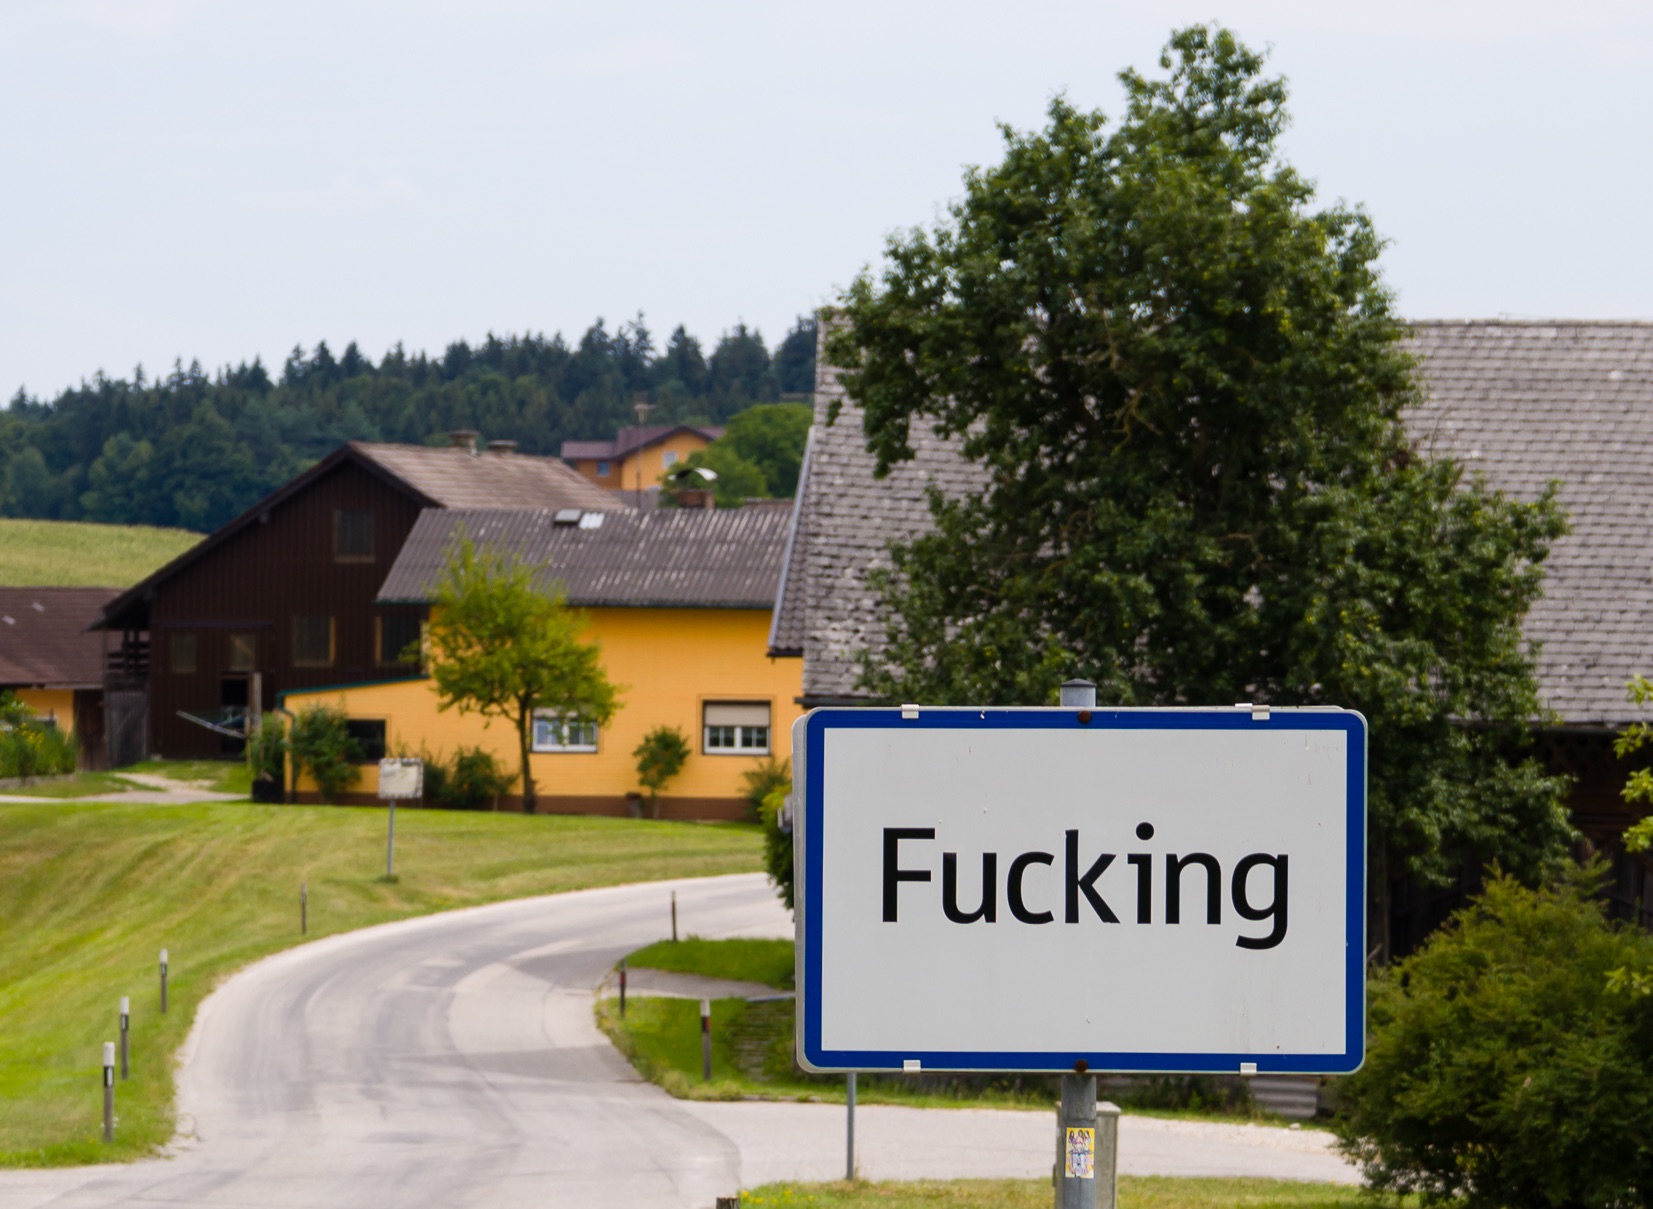 The village of Fucking in Austria, with the frequently stolen traffic sign. The Village will change its name to Fugging on 1 January 2021